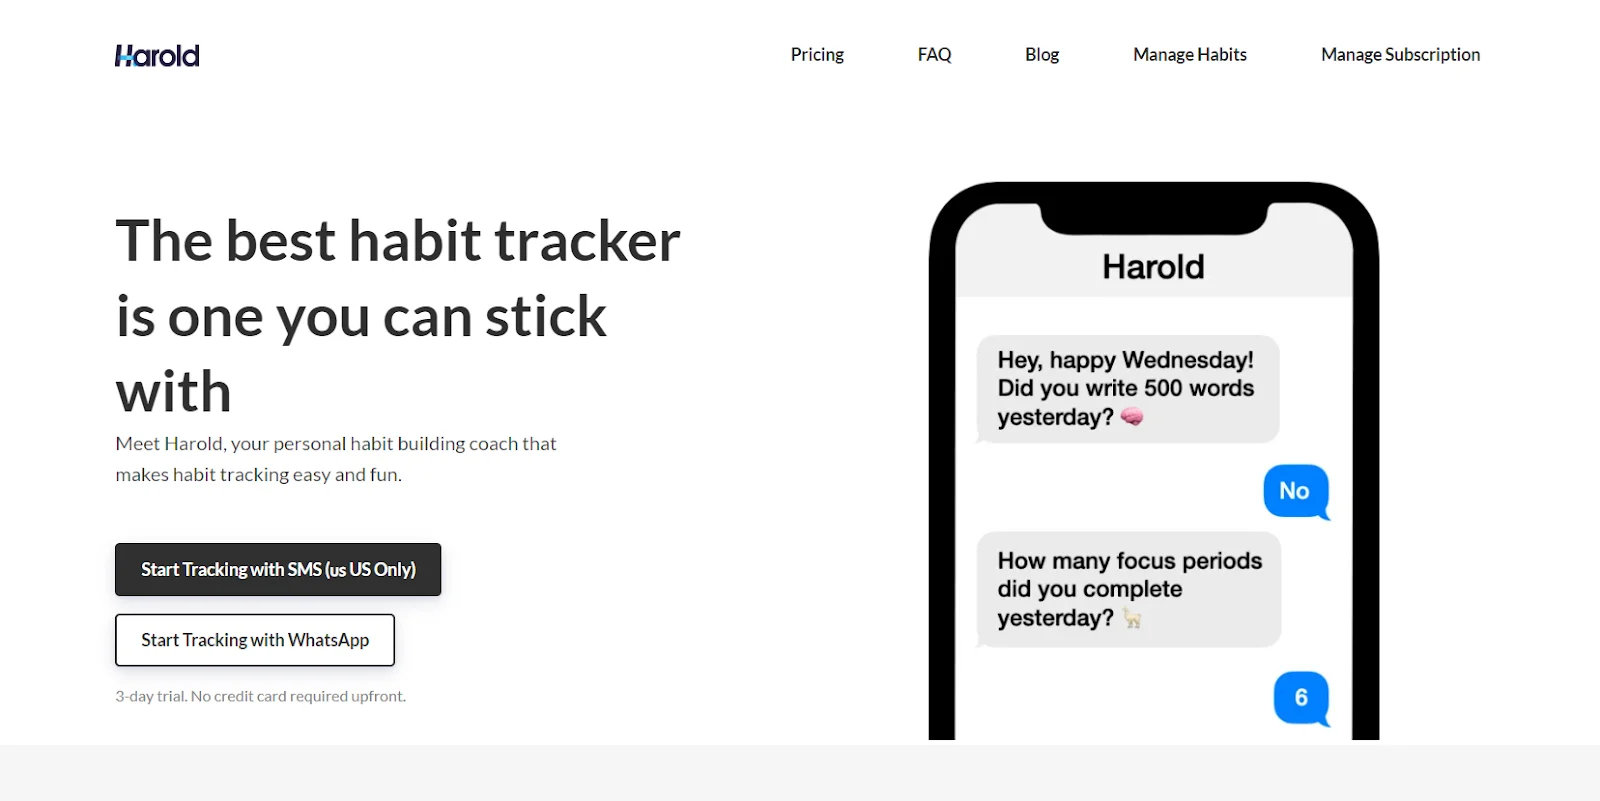 Harold the habit tracker website - The best habit tracker is one you can stick with